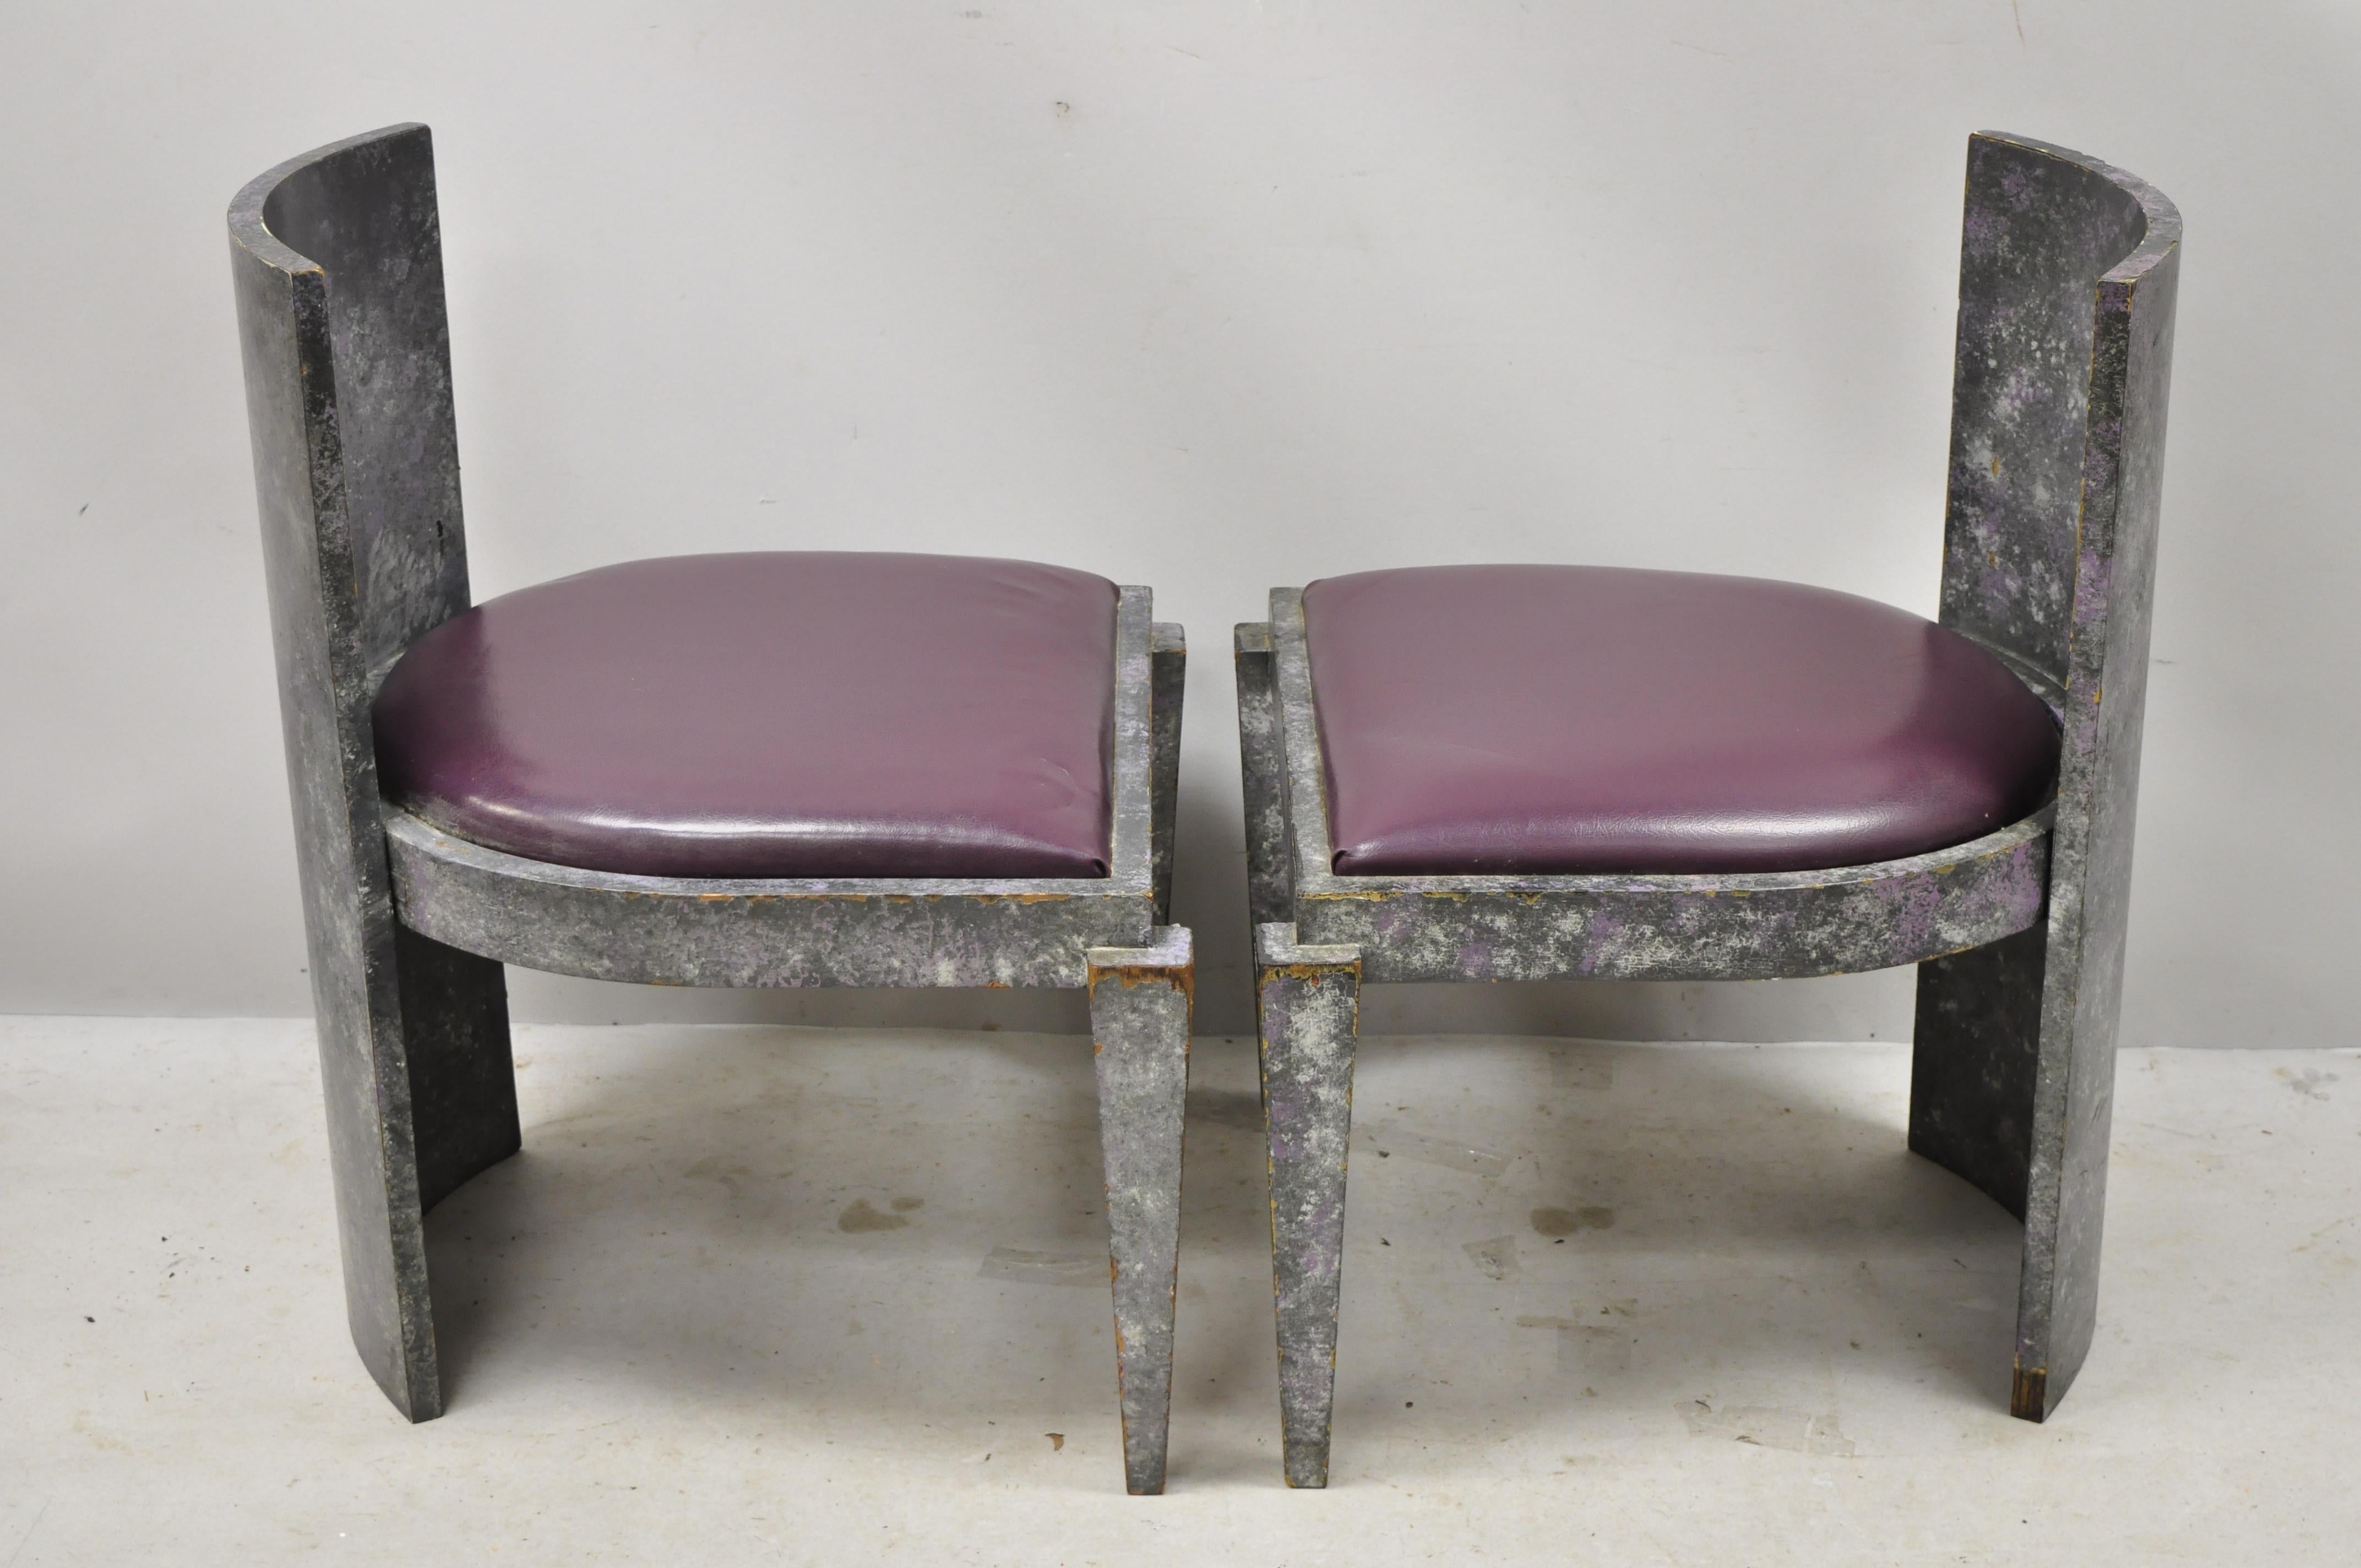 North American Vintage Mid-Century Modern Art Deco Purple and Gray Club Game Chairs, a Pair For Sale